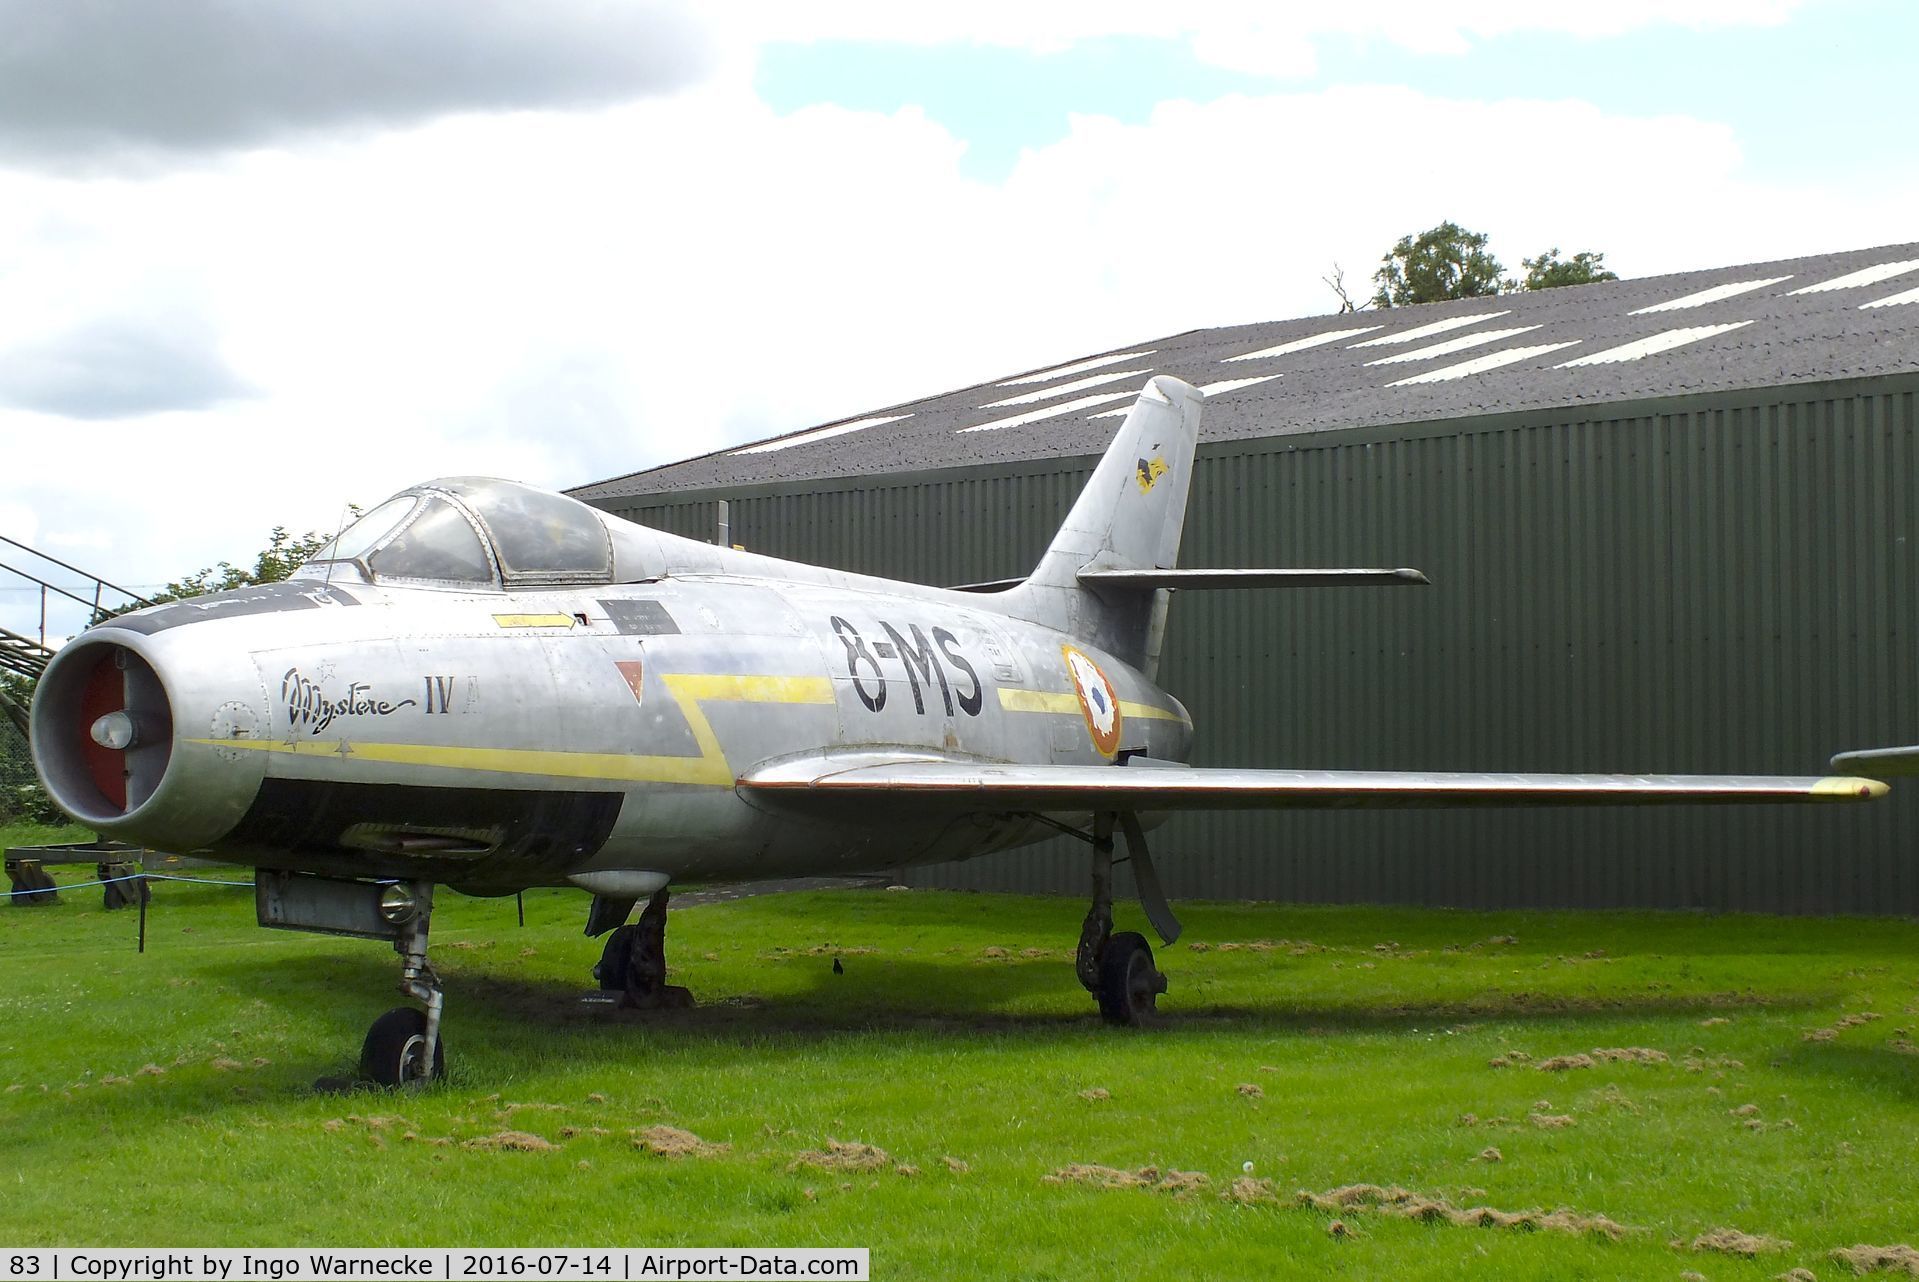 83, Dassault MD-454 Mystere IVA C/N 83, Dassault Mystere IV A at the Newark Air Museum